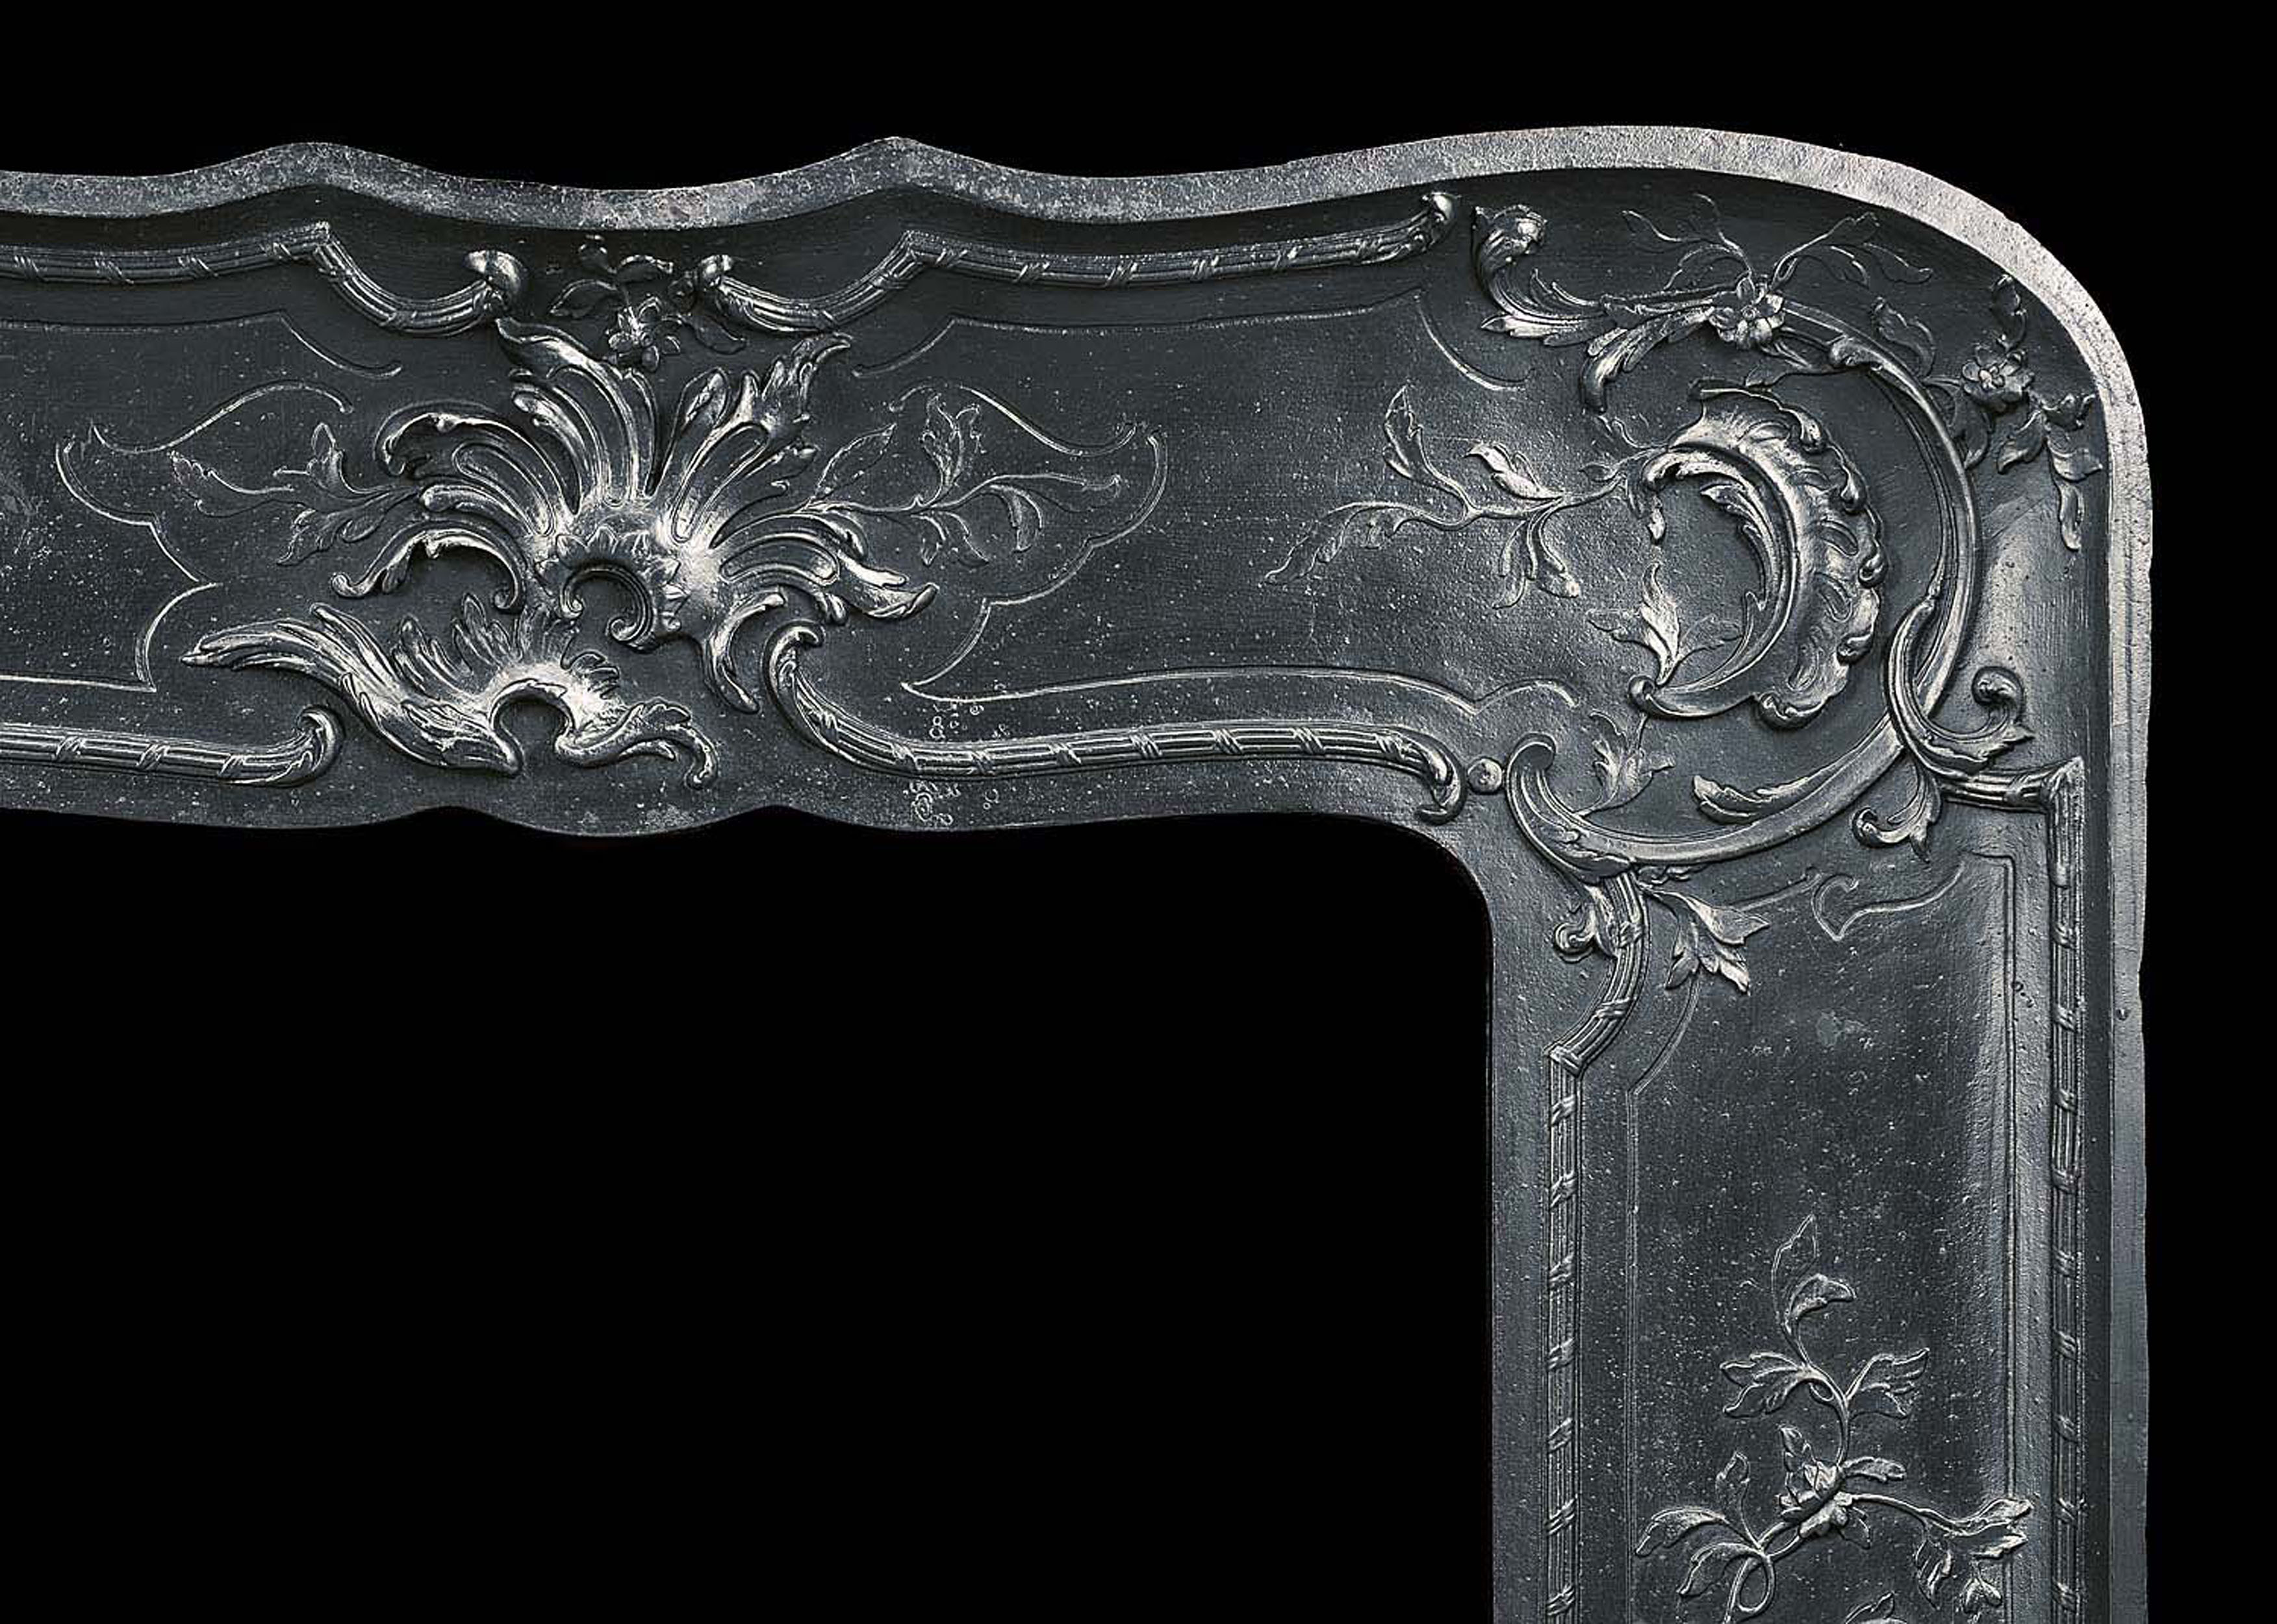  Foliate and Floral cast iron Louis XVI Fireplace Insert   